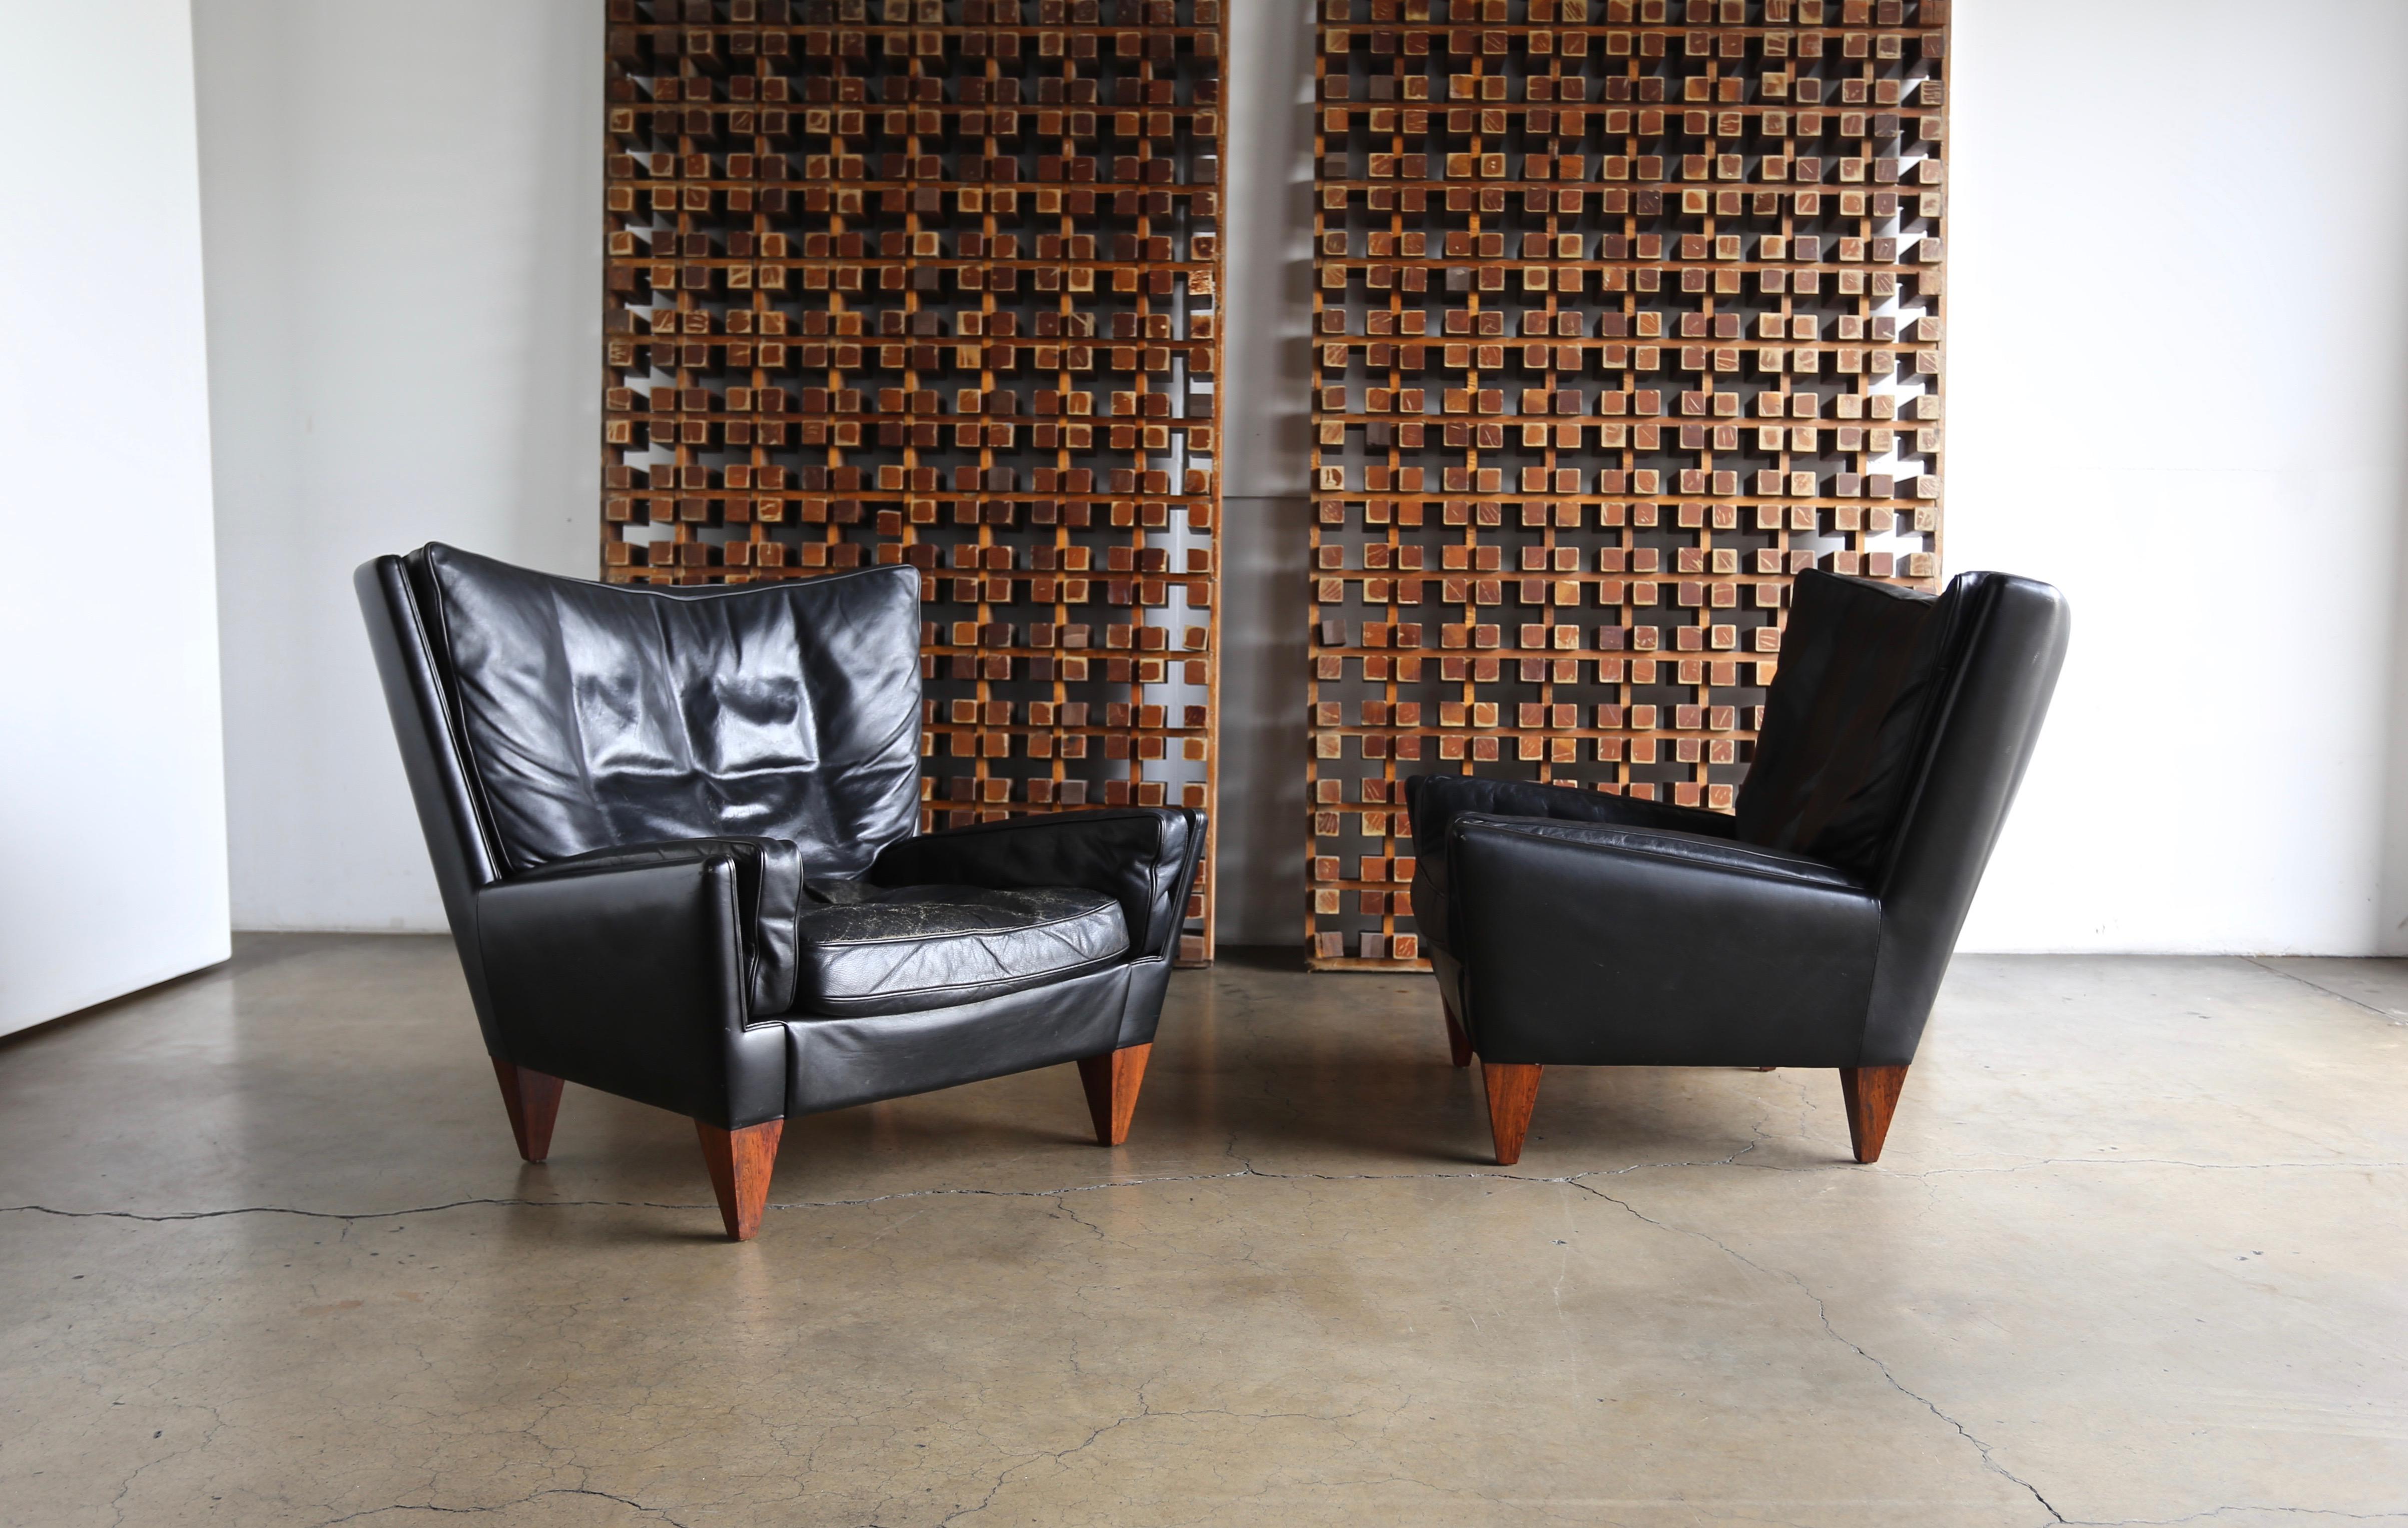 Illum Wikkelsø black leather pyramid chairs for Holger Christiansen circa 1965. Beautiful patina to the original leather and rosewood.